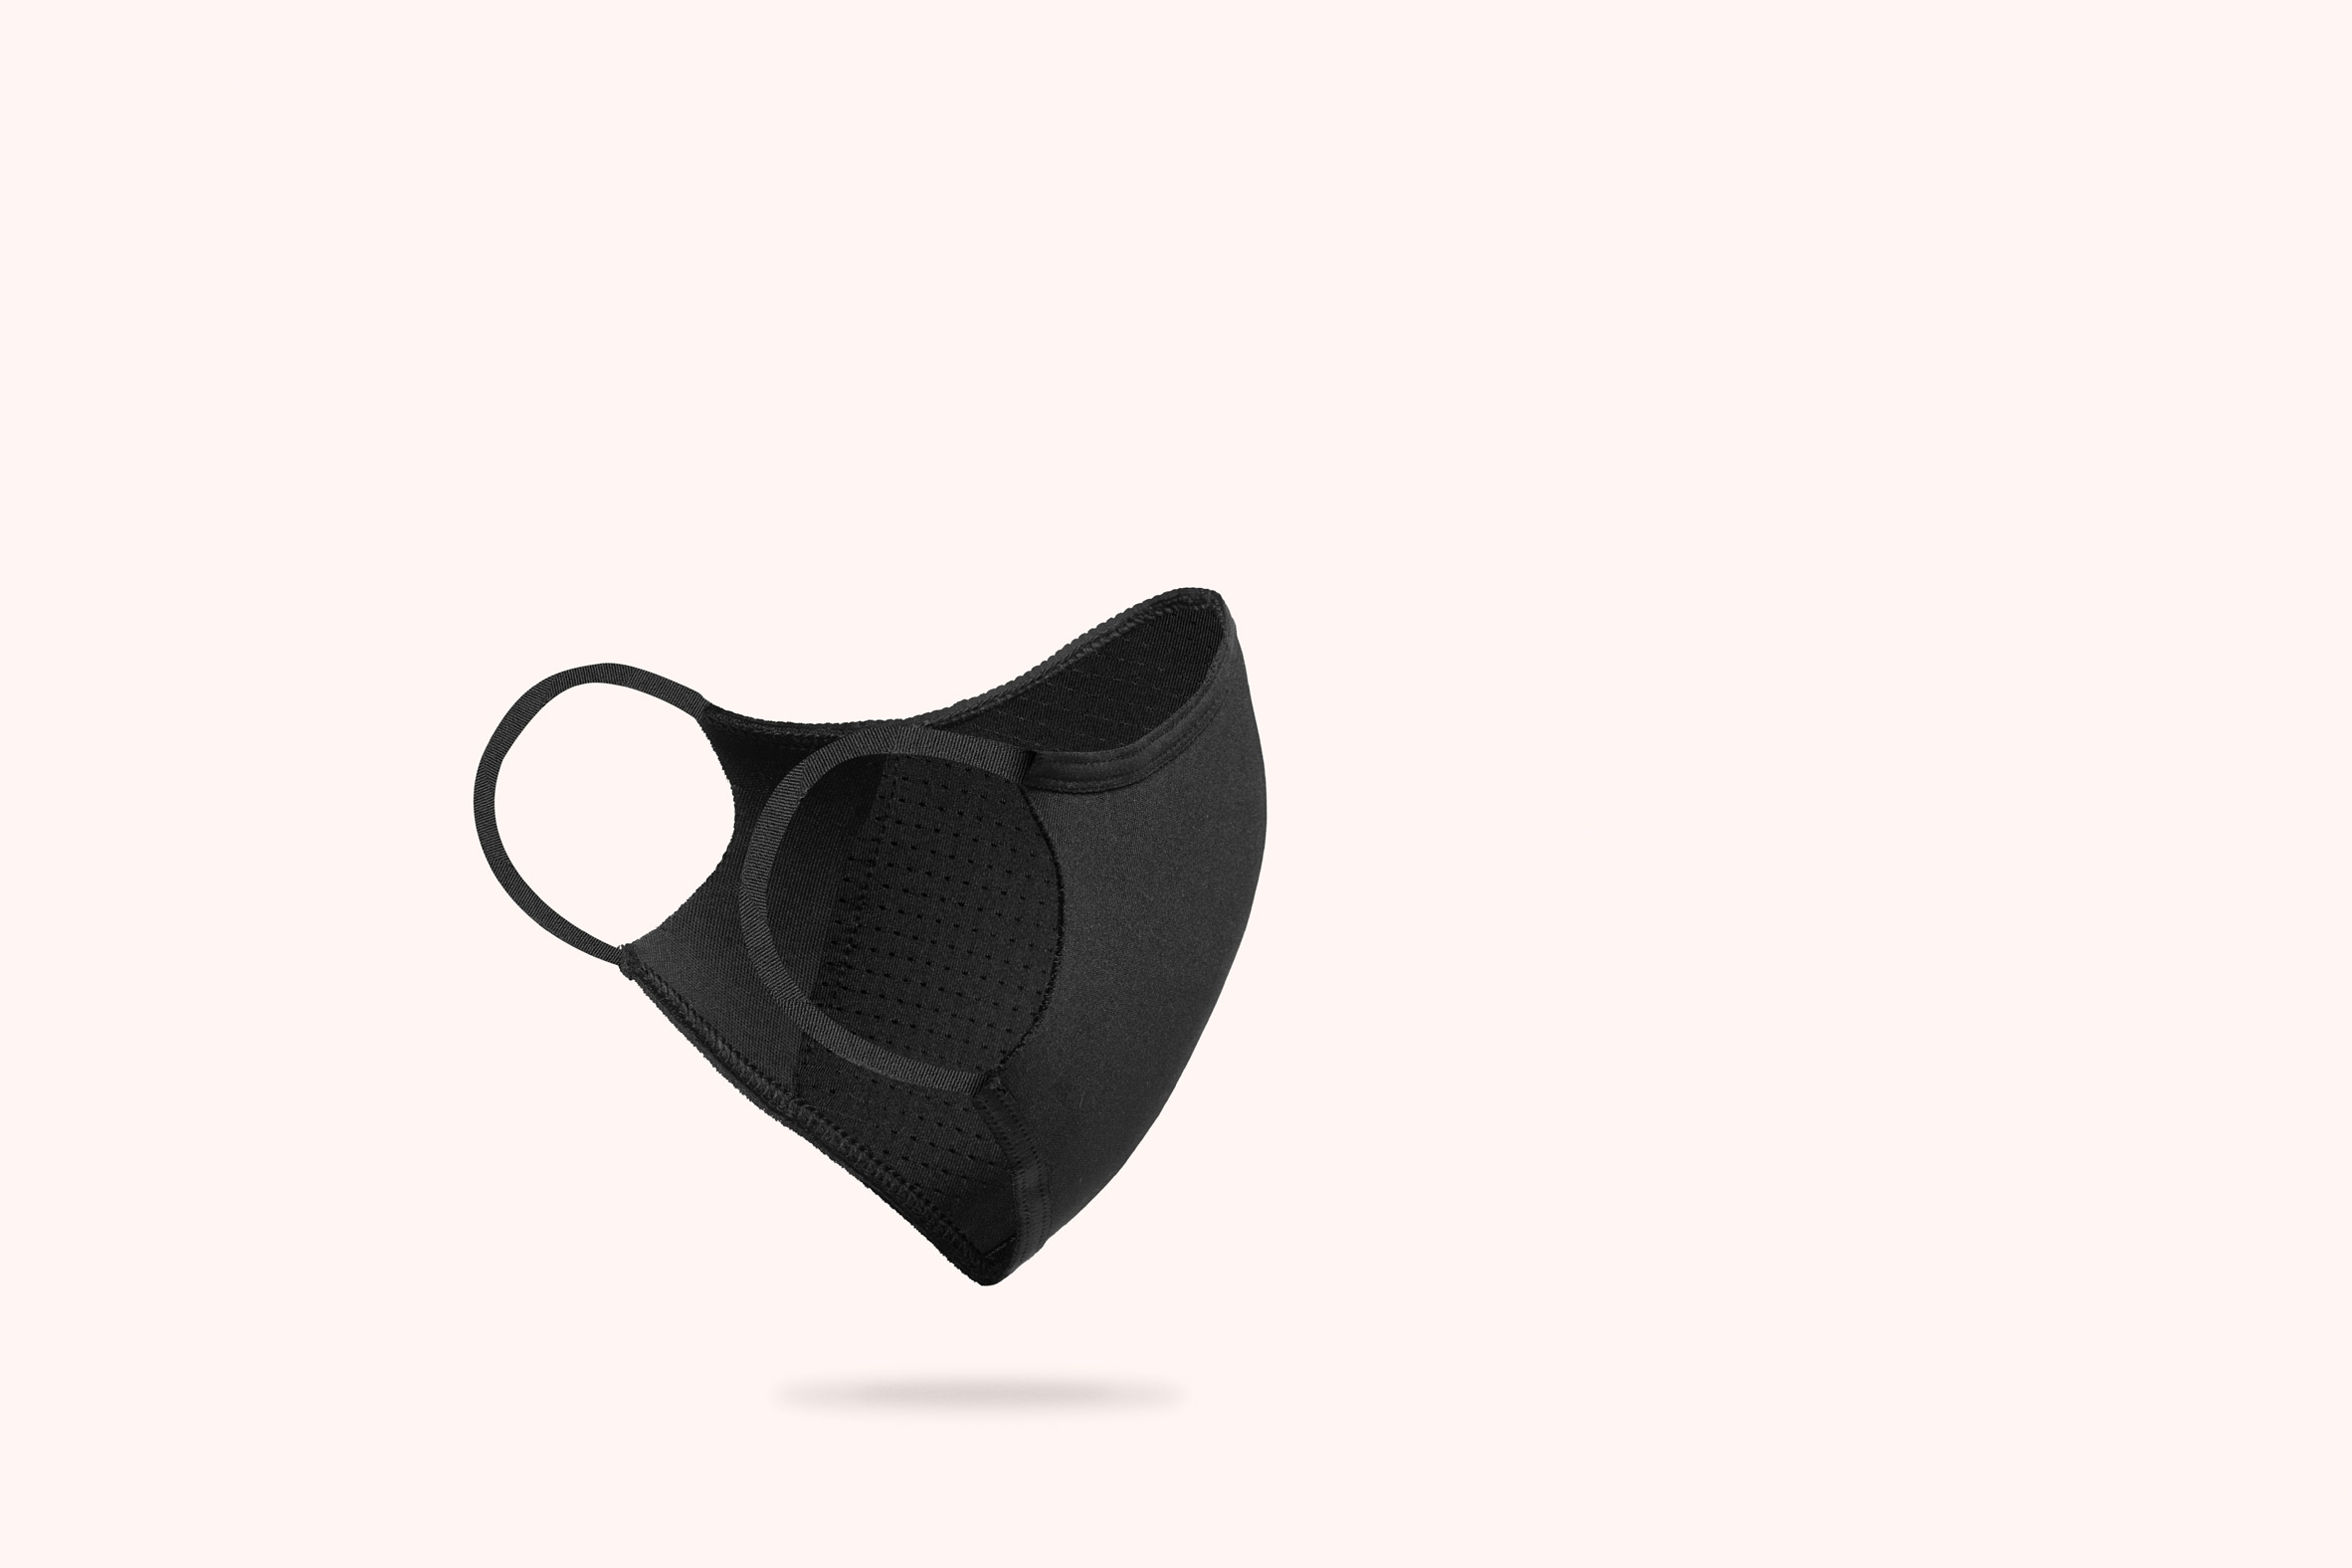 Adidas launches reusable face mask called Face Cover